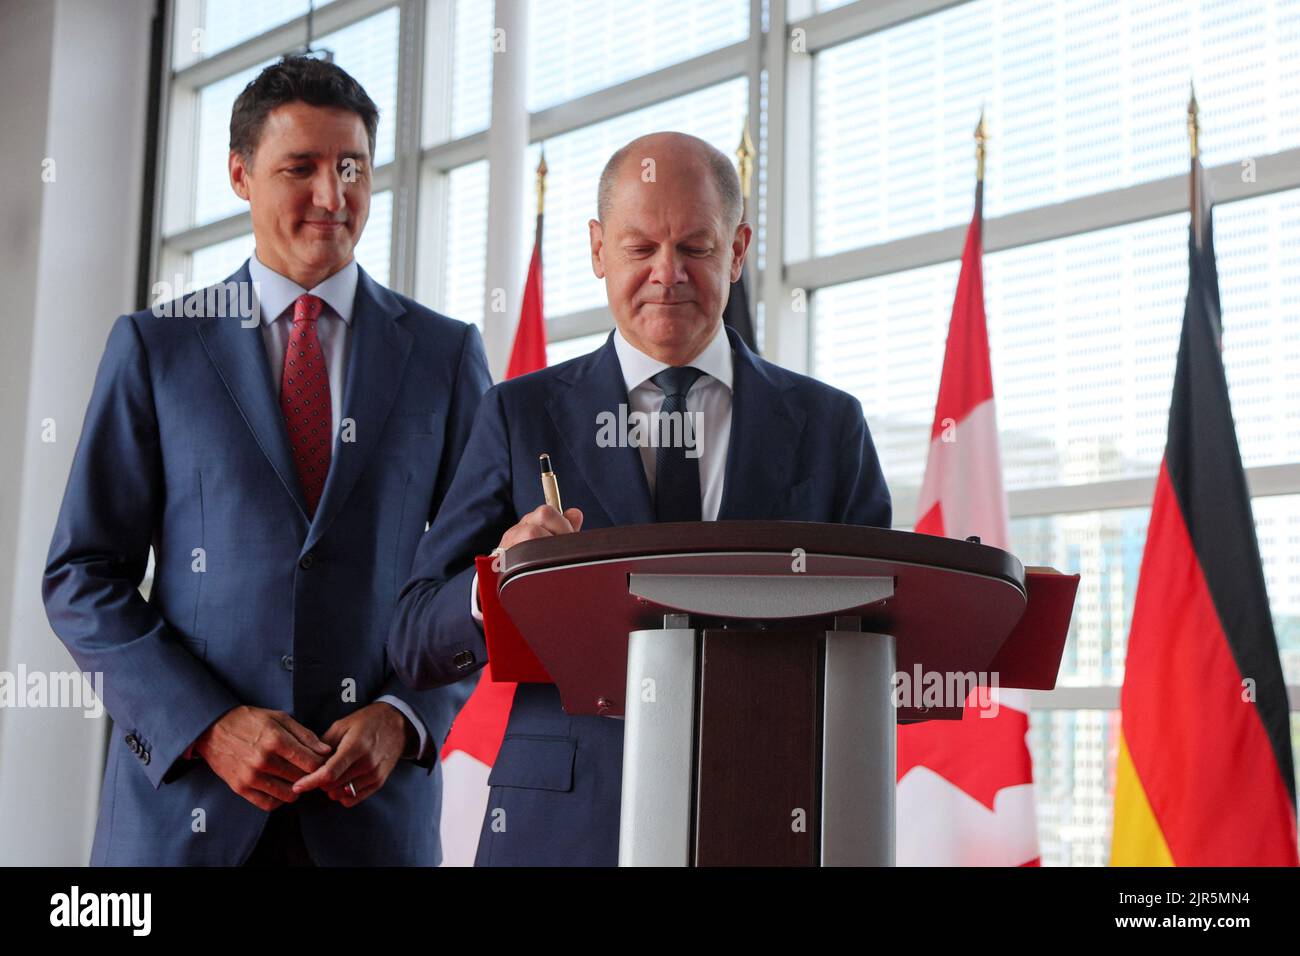 Germany's Chancellor Olaf Scholz signs the Golden Book of Canada as he is welcomed by Canada's Prime Minister Justin Trudeau at the Montreal Science Centre in Montreal, Quebec, Canada August 22, 2022.  REUTERS/Christinne Muschi Stock Photo